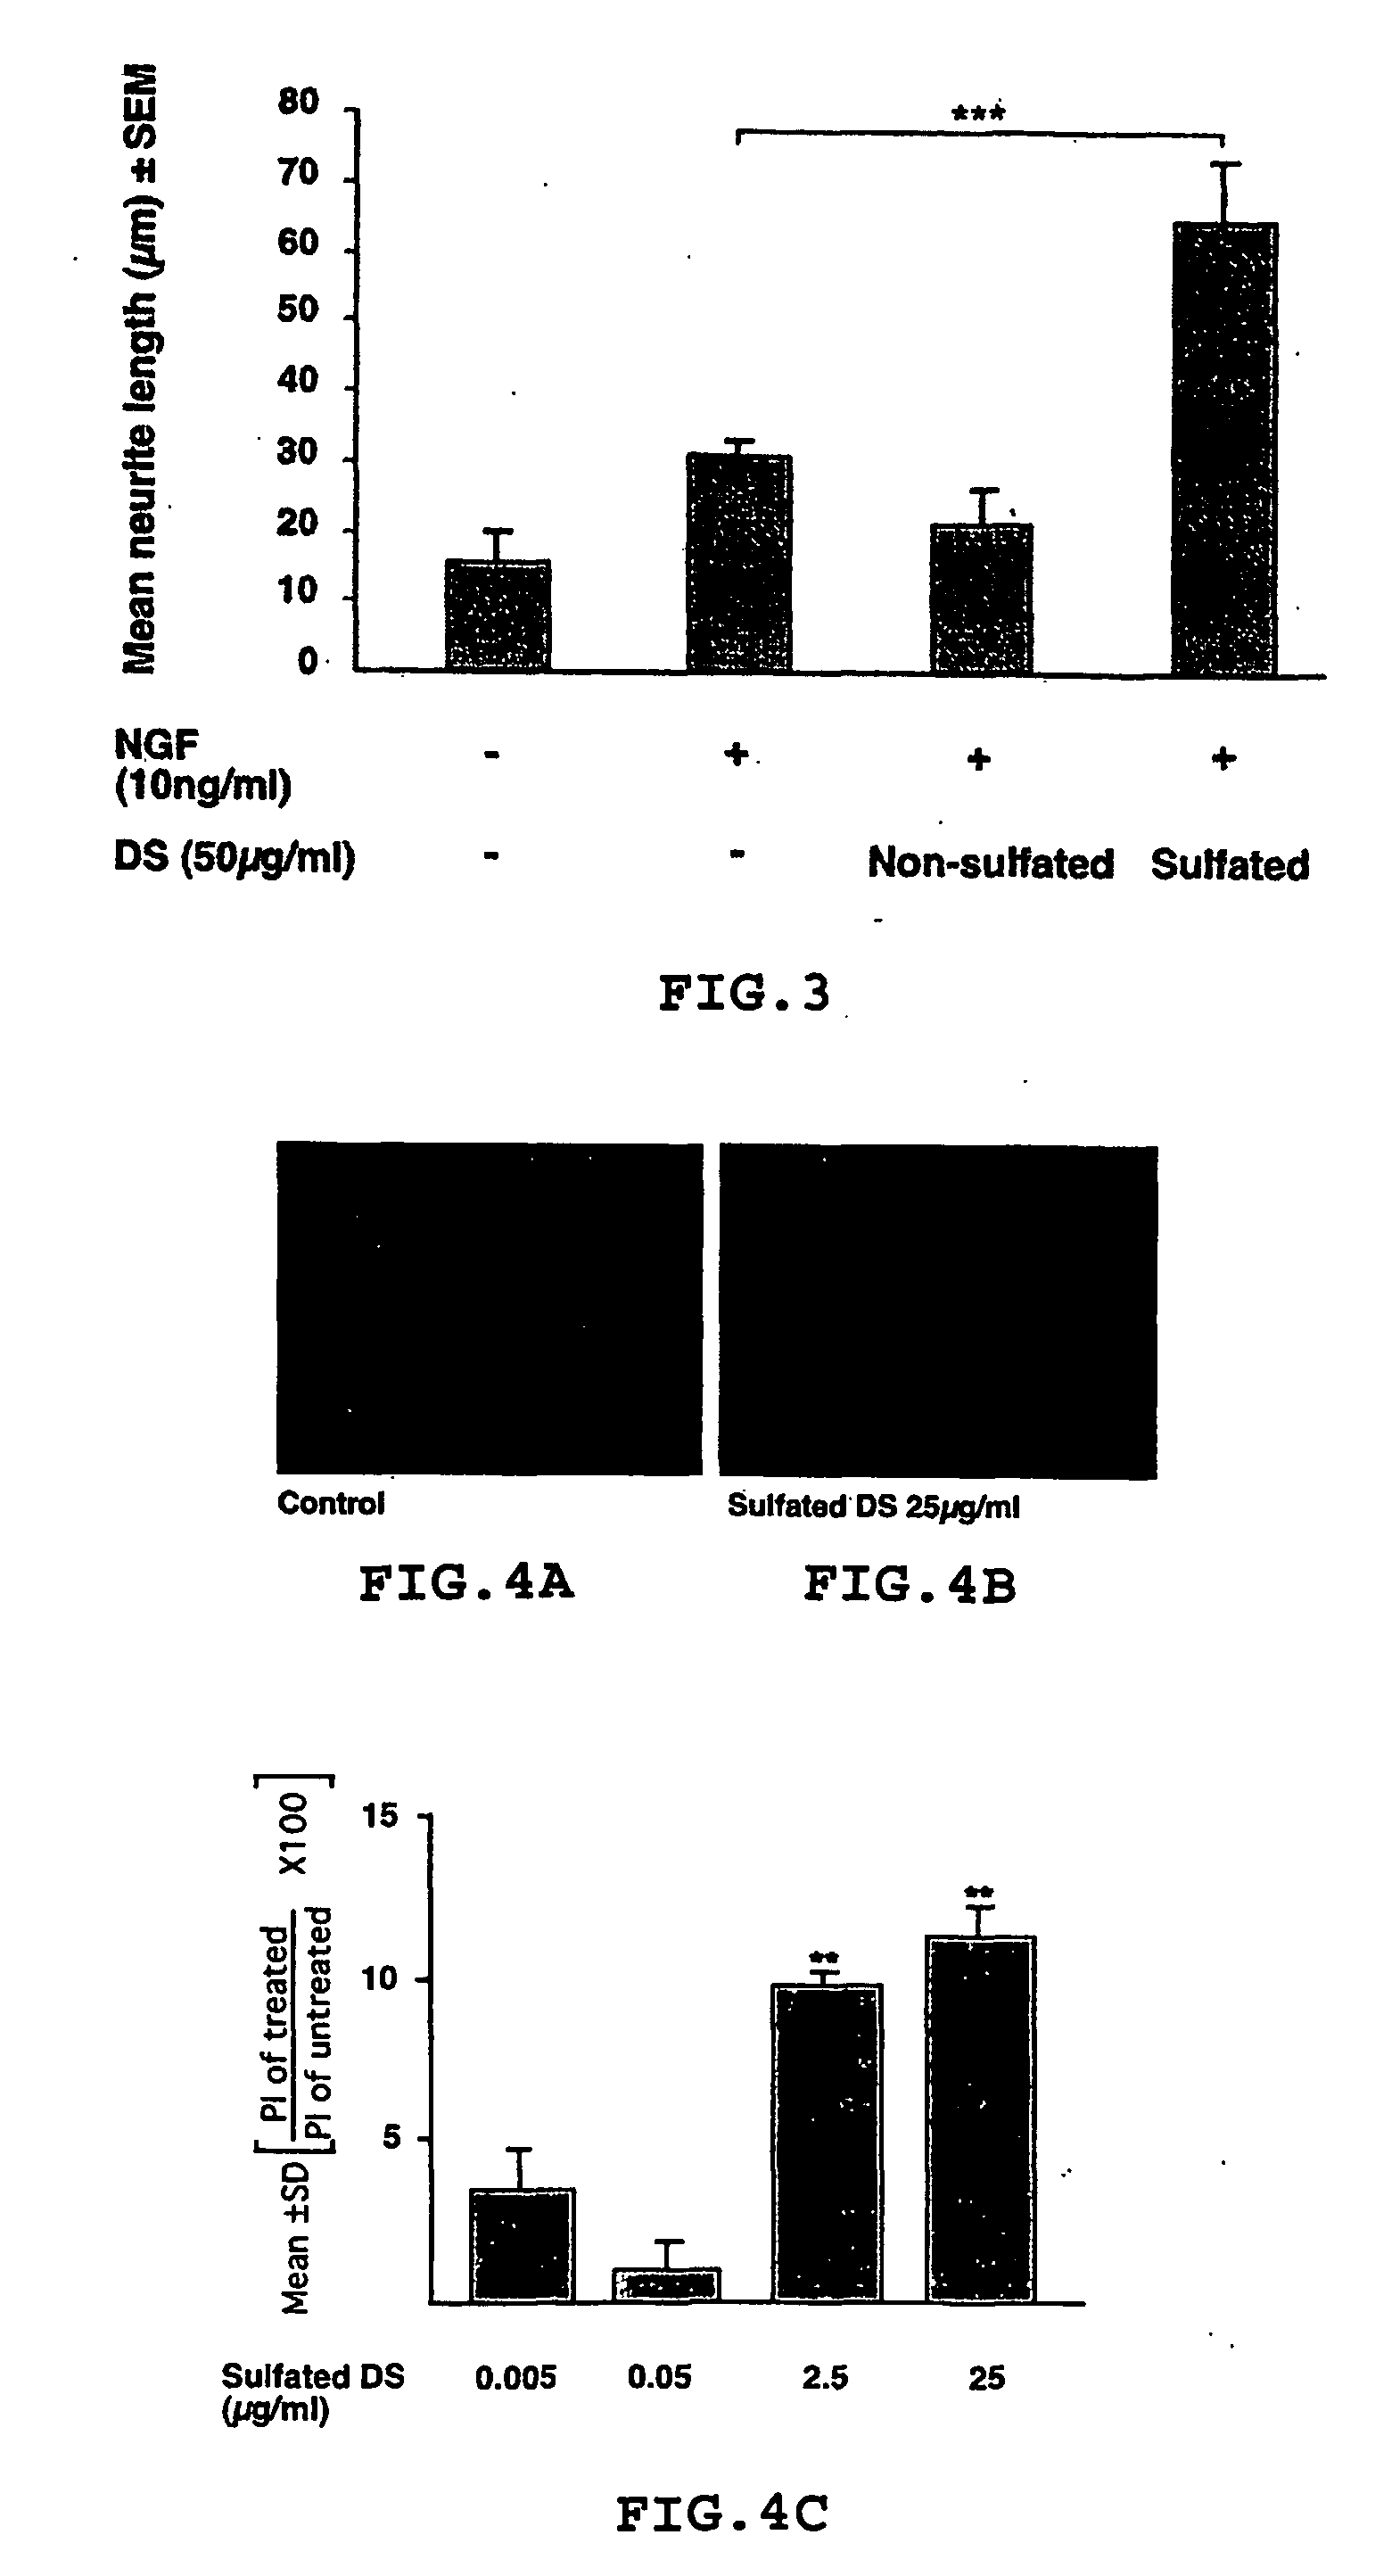 Method for Treating or Inhibiting the Effects of Injuries or Diseases that Result in Neuronal Degeneration